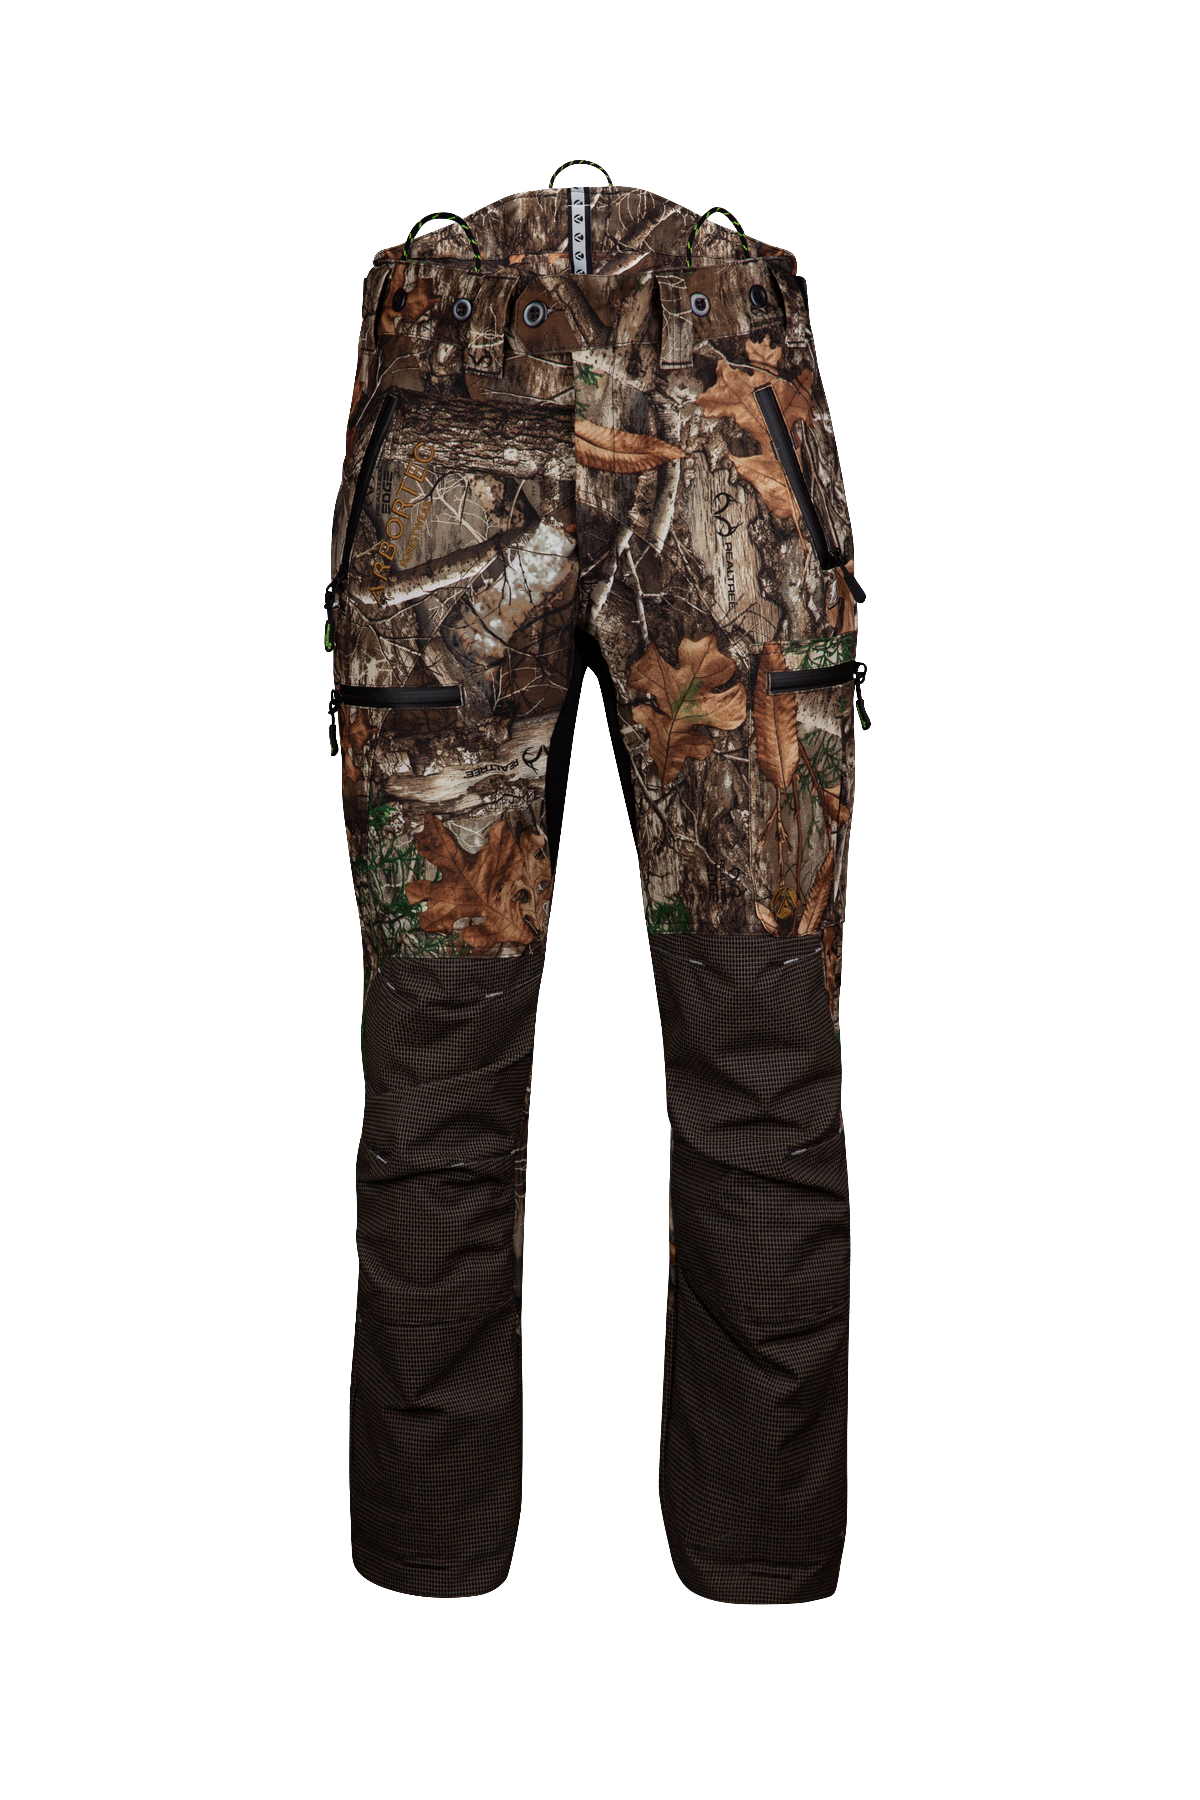 AT4060 - Breatheflex Pro Realtree Chainsaw Trousers Design A/Class 1 - Brown